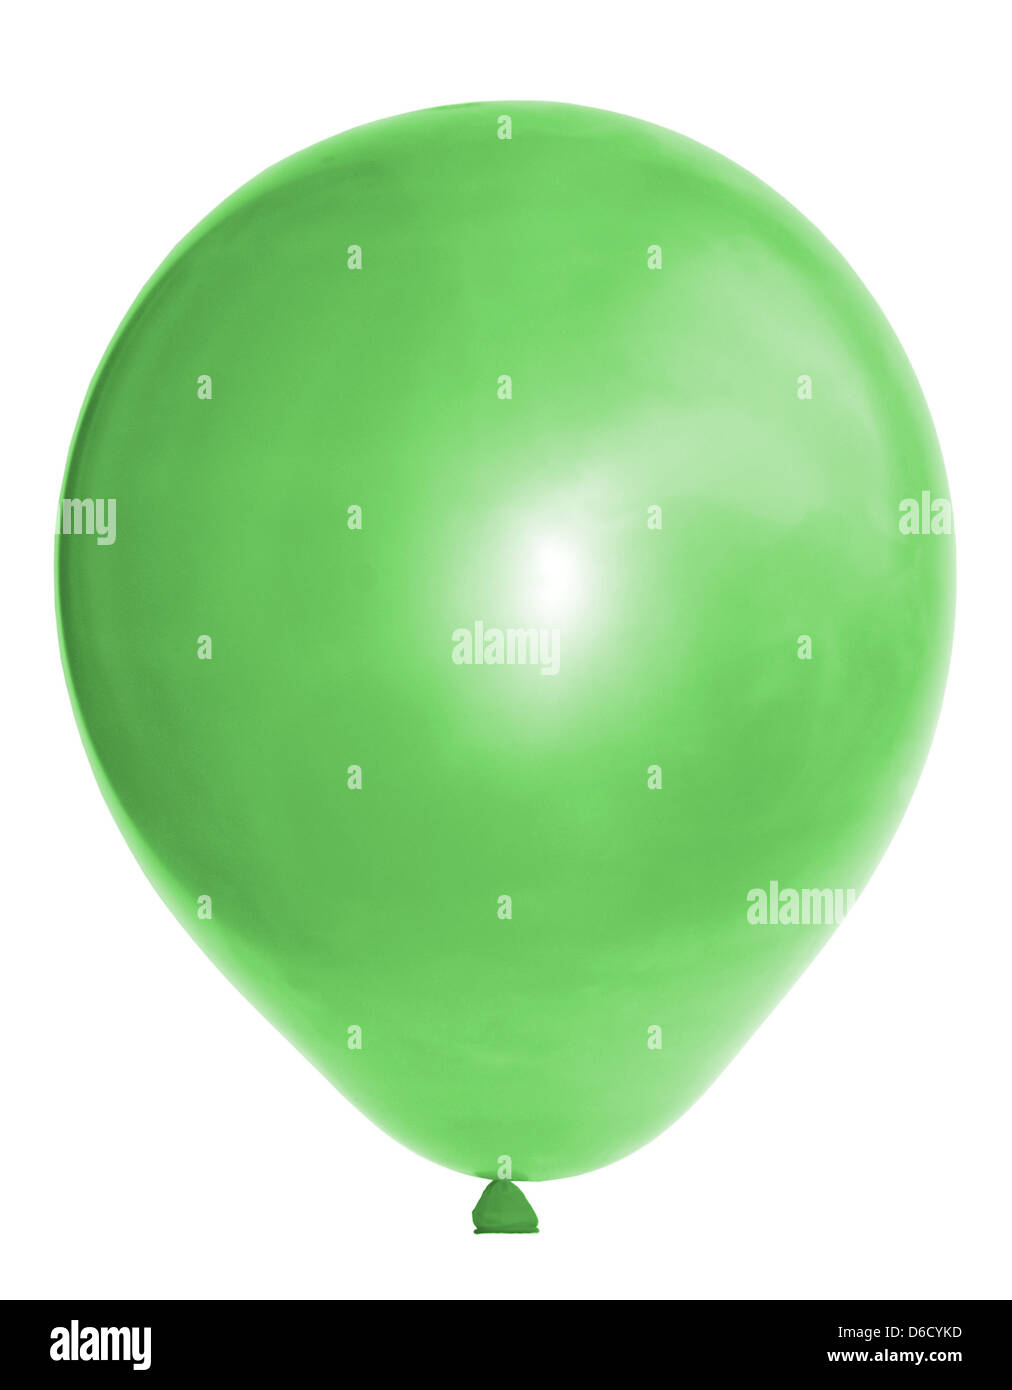 Soft focus to bottom part of green balloon with rubber tail tied